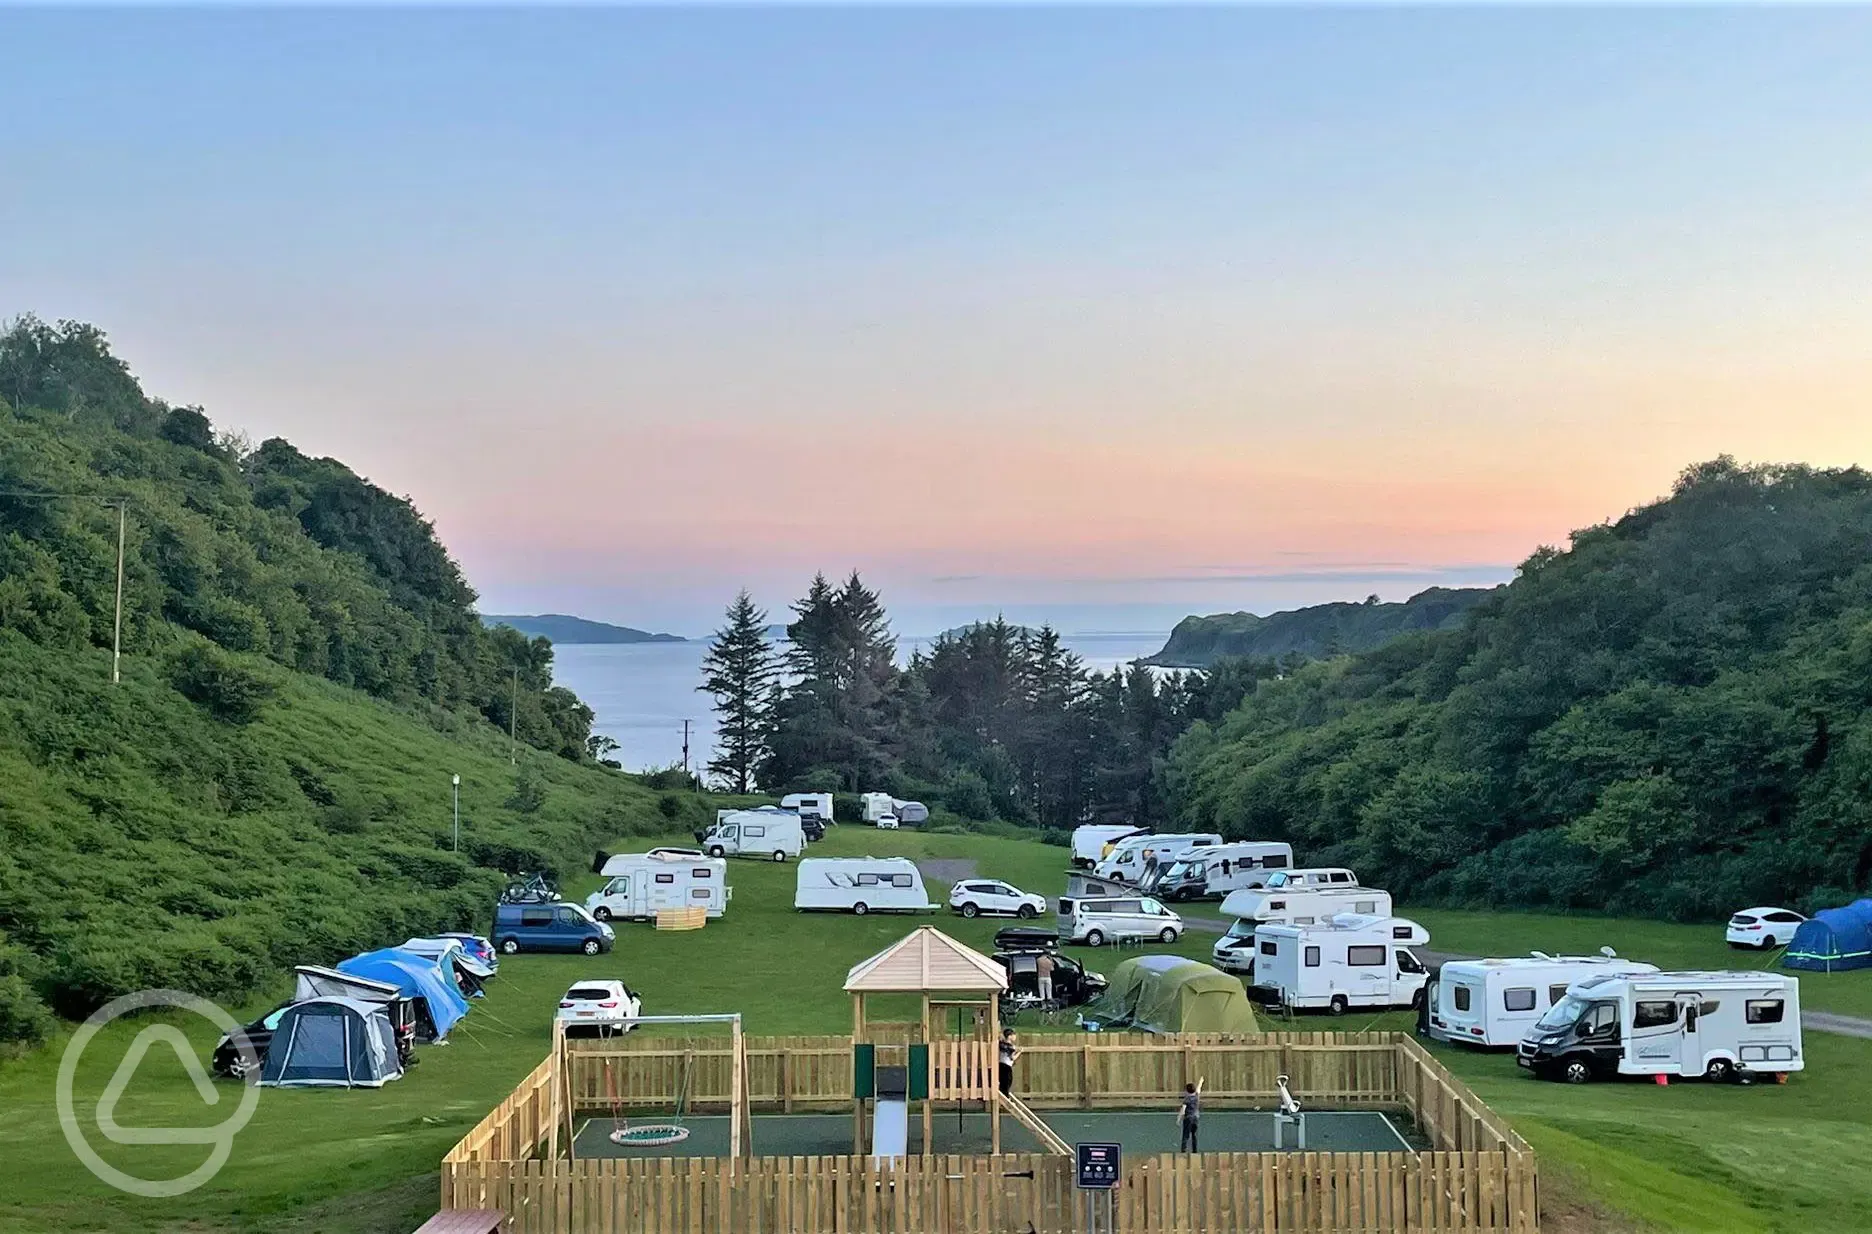 Campsite and playpark at sunset